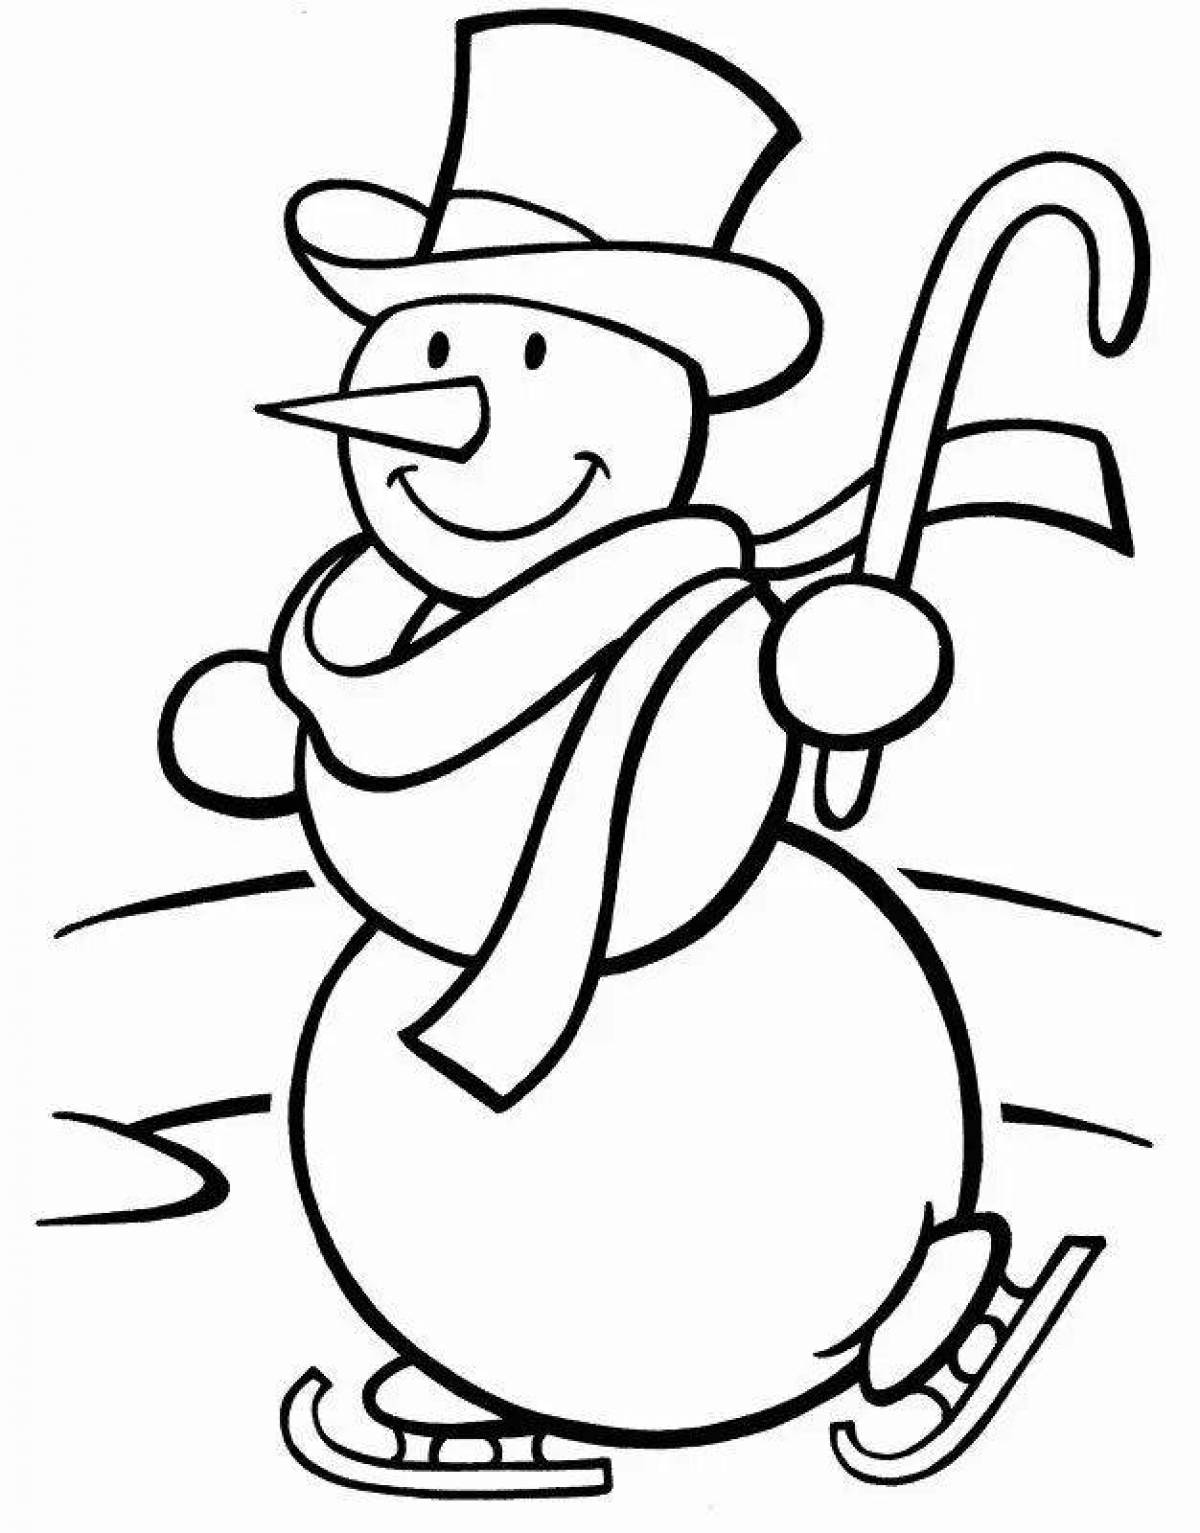 Coloring page nice snowman